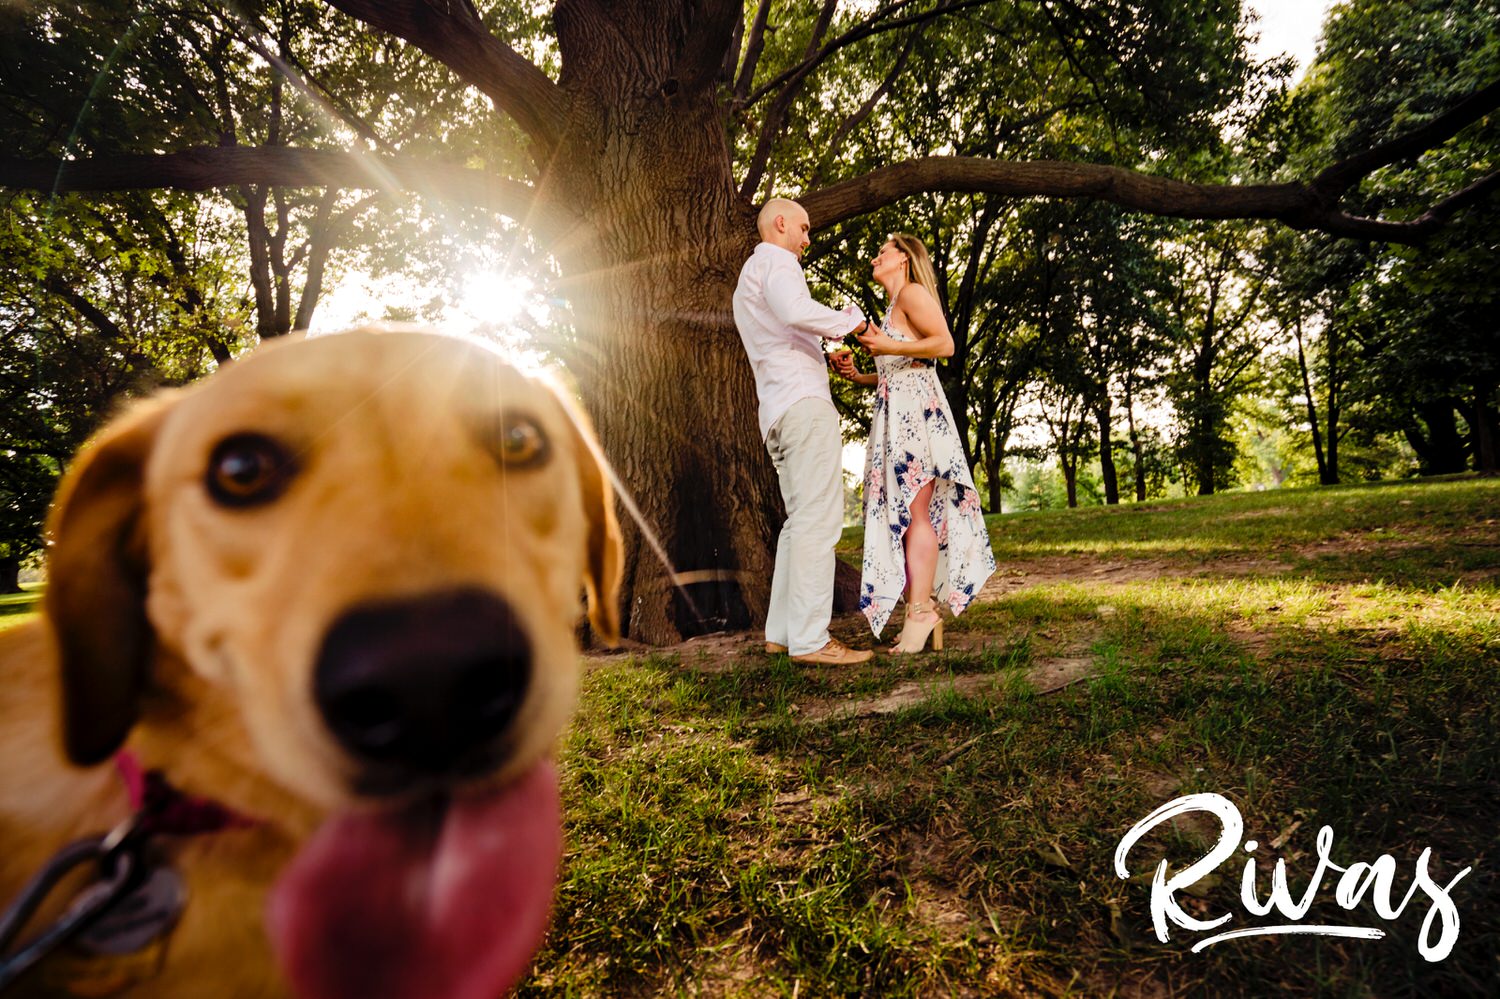 A silly , candid picture of a dog photo-bombing the camera very close up during a pretty portrait of an engaged couple at Loose Park. 